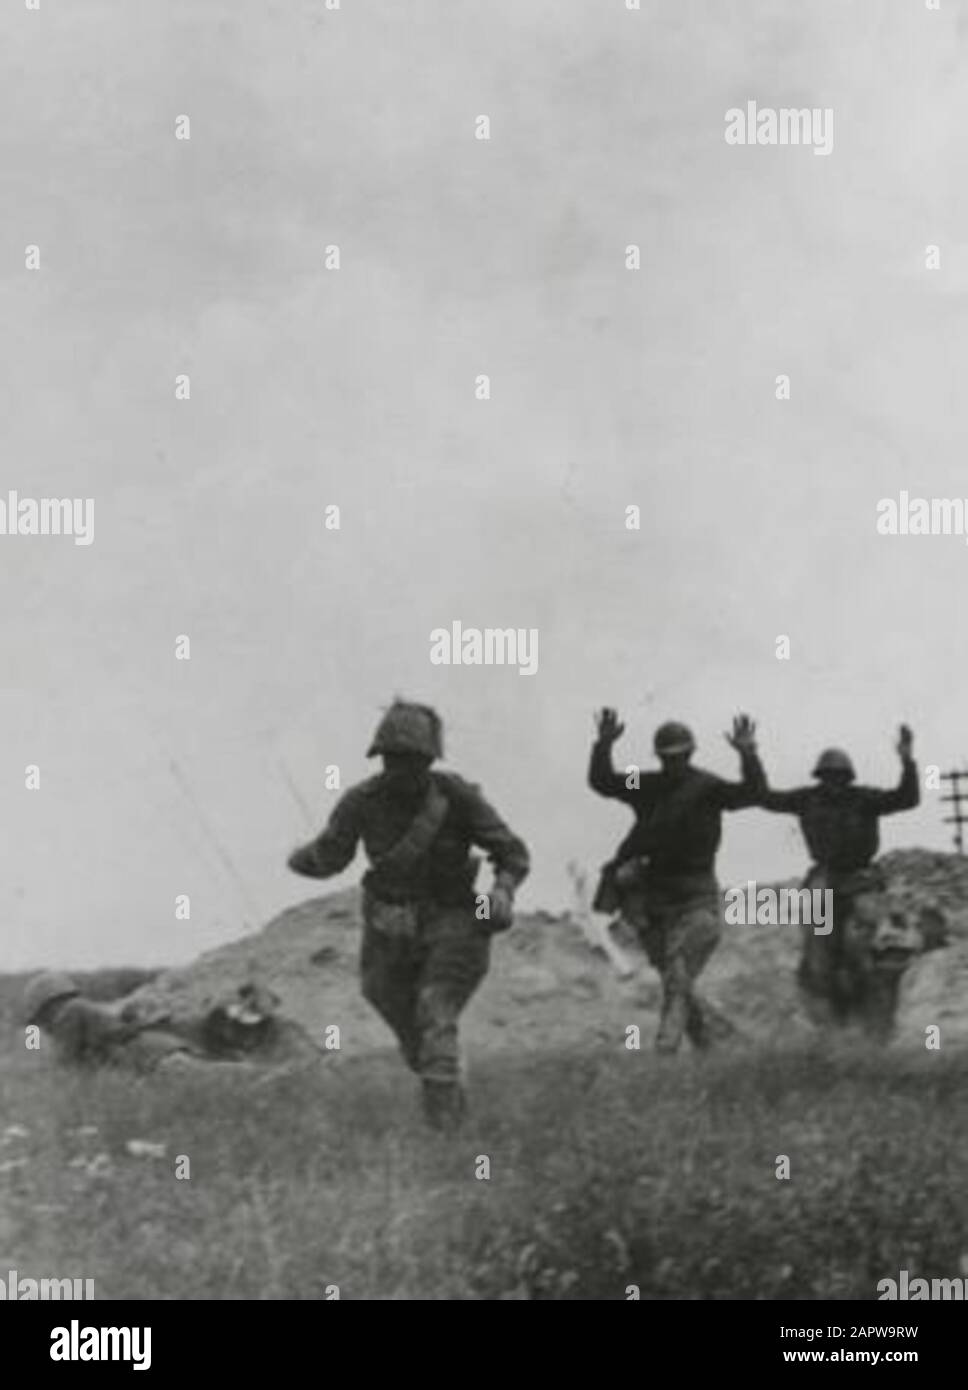 Spaarnestad Photo/SFA022804149 World War II. Prisoners of war are carried away with hands up. Eastern Front, 1941. POWs (Prisoners of war) are being marched off, with hands hero high. Eastern front, 1941.; Stock Photo